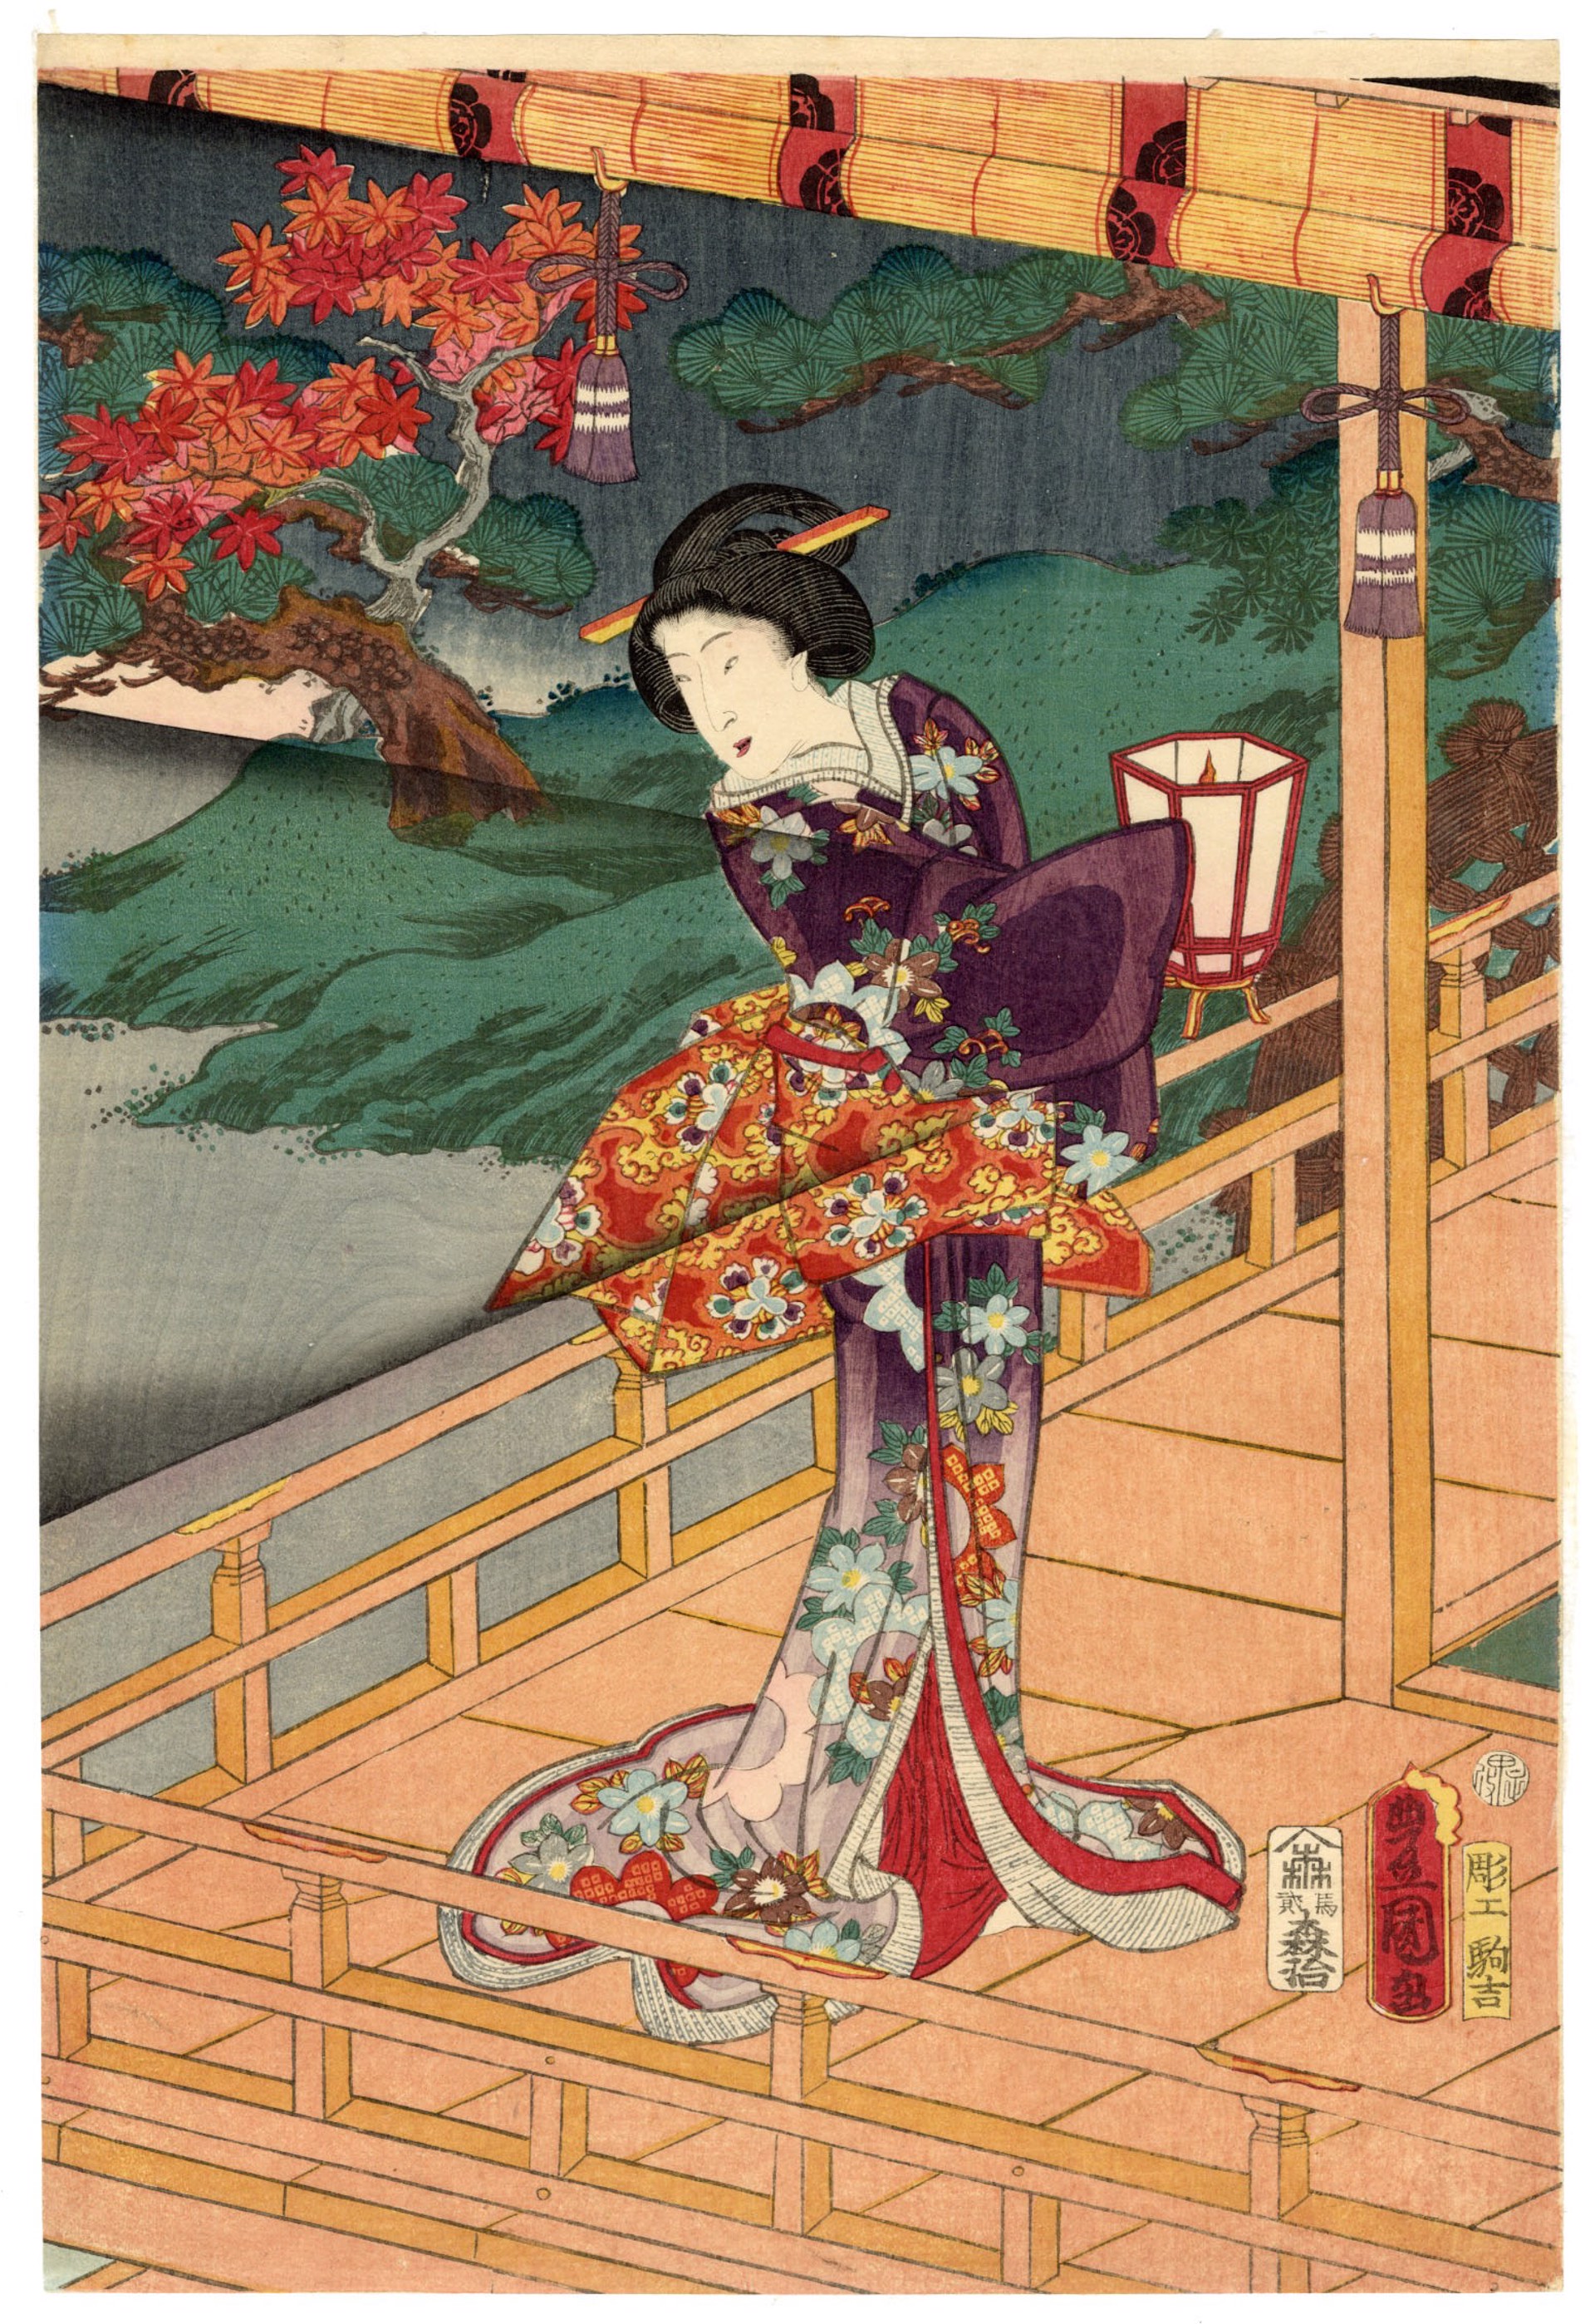 Listening to the Sound of crickets on an Autumn Evening by Kunisada